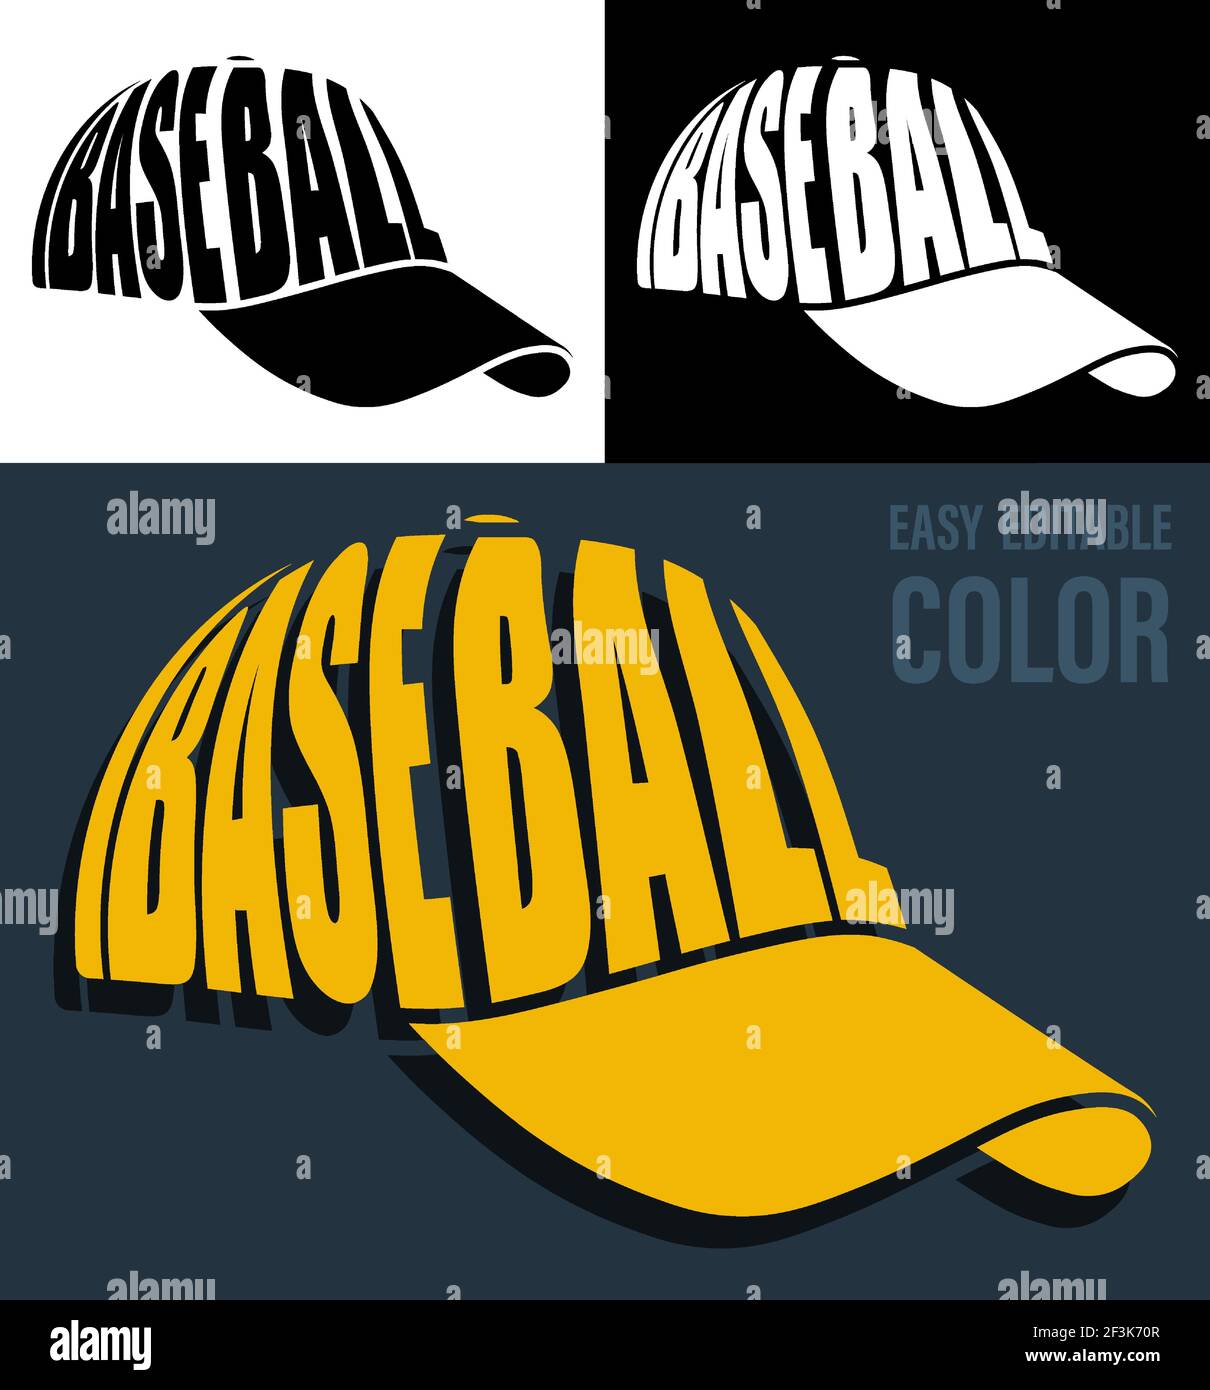 sport baseball cap in simple style with decorative inscription